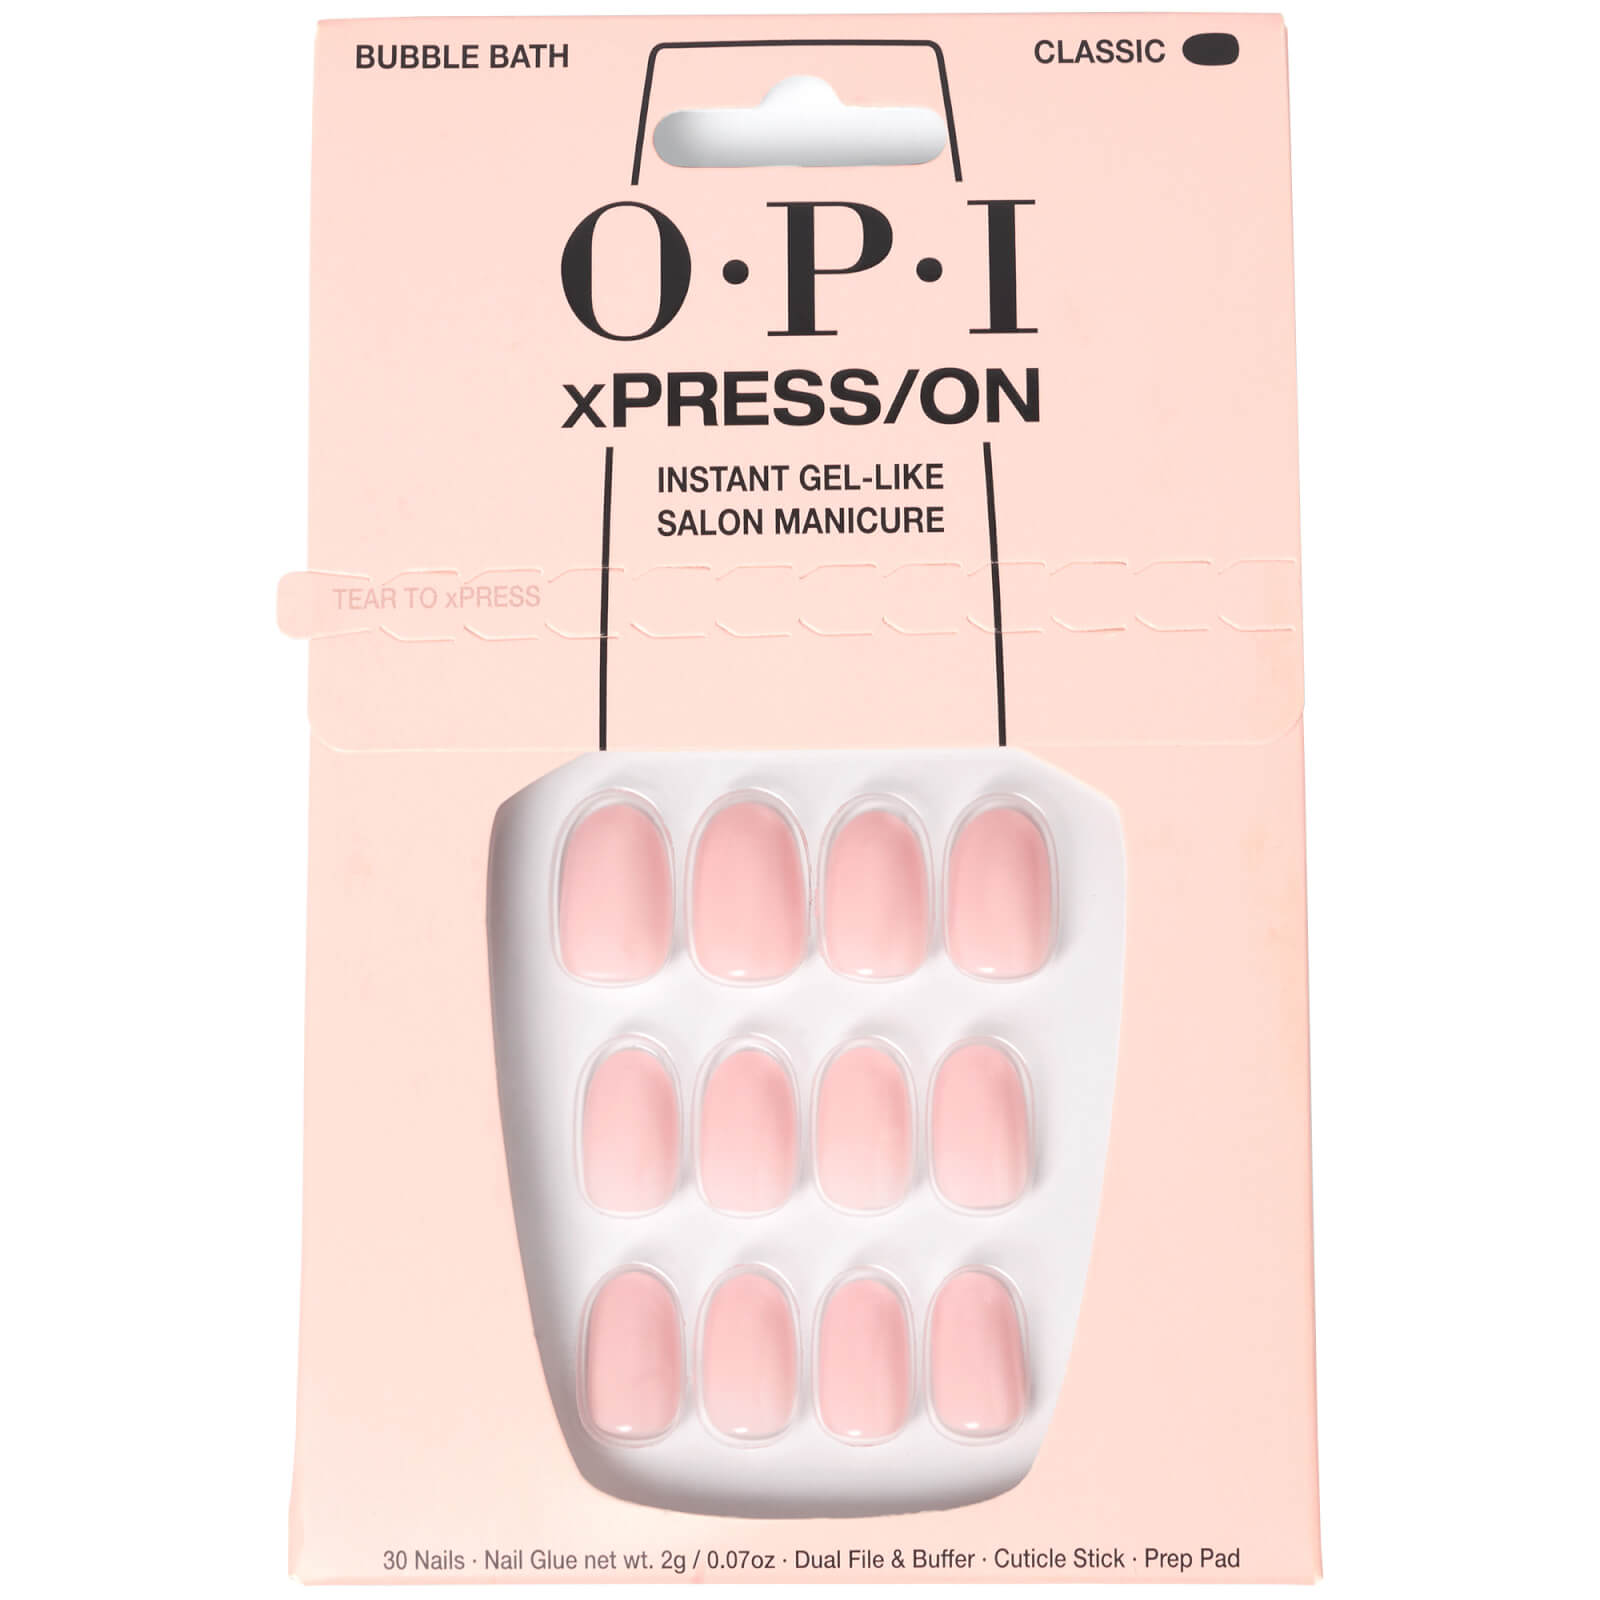 Image of OPI xPRESS/ON French Press Press on Nails for Gel-Like Salon Manicure - Bubble Bath